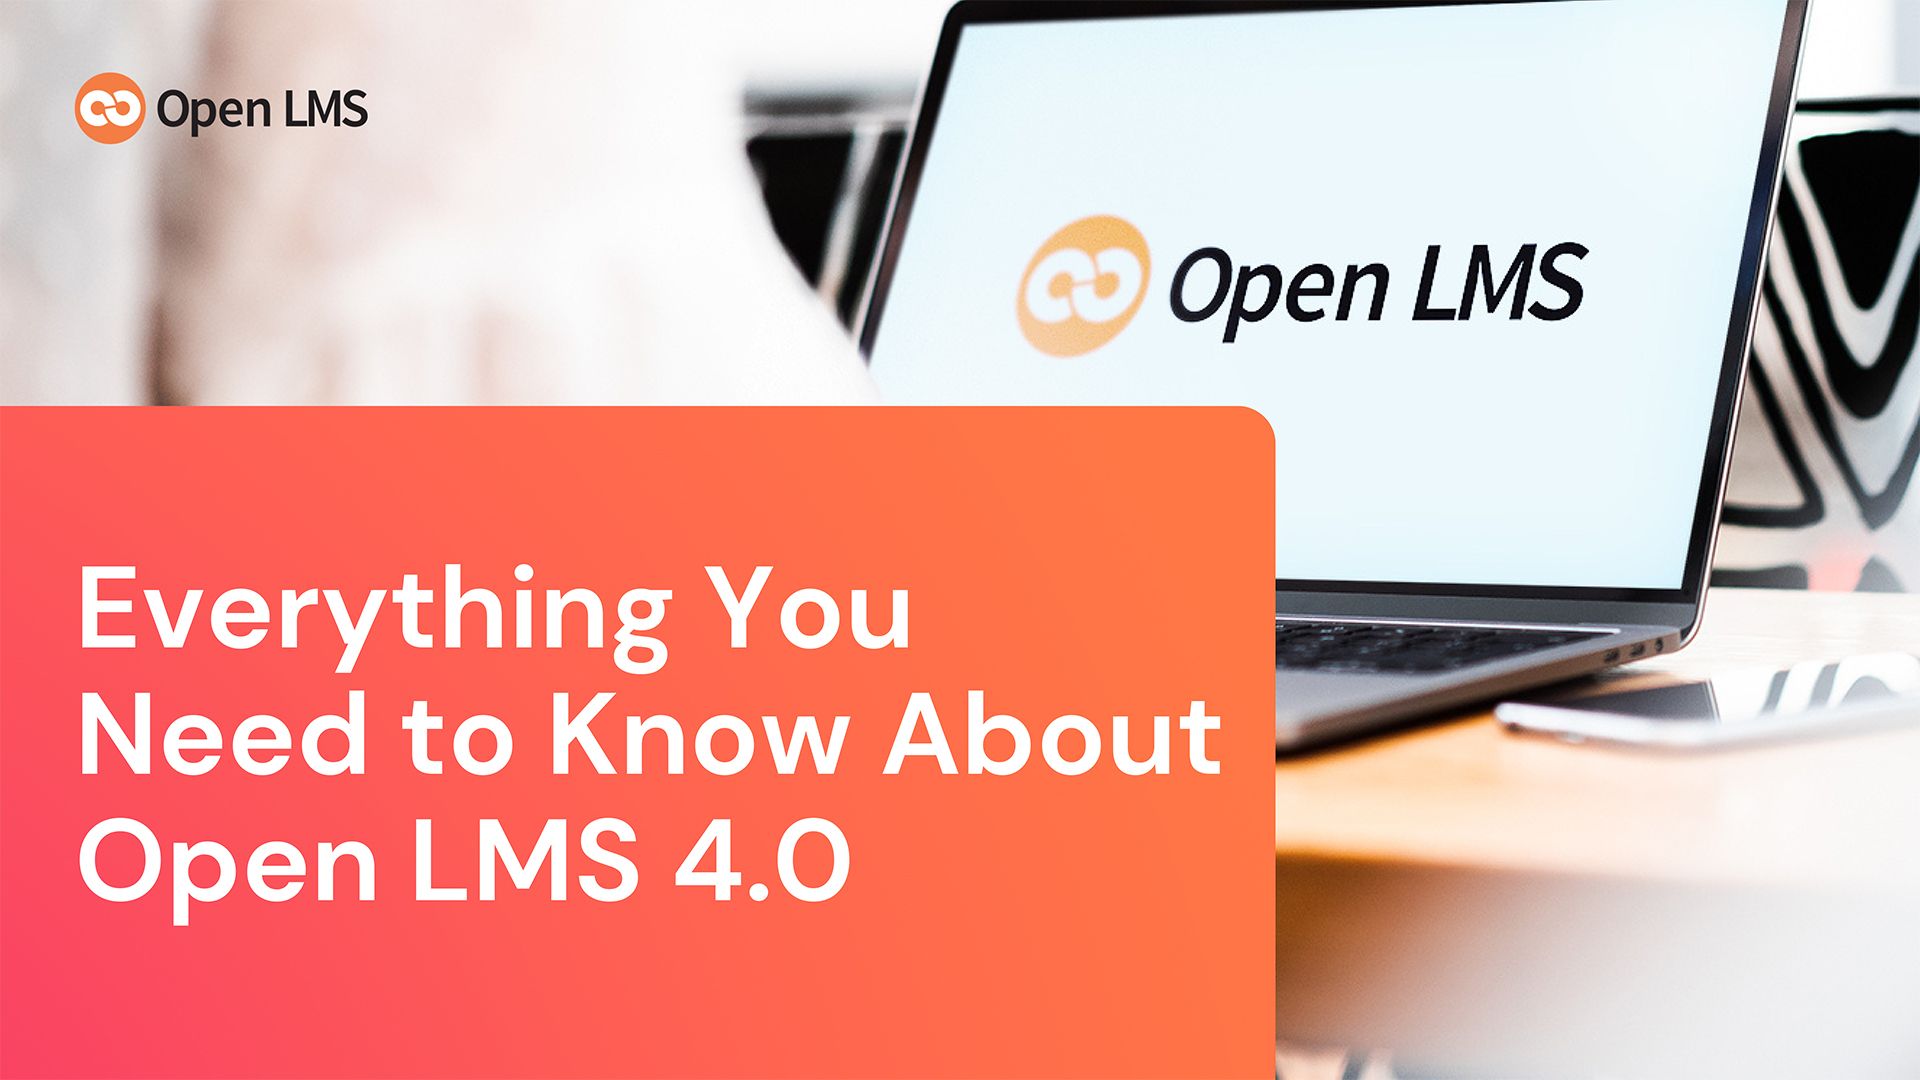 Everything You Need to Know About Open LMS 4.0 (And Why You Should Upgrade)